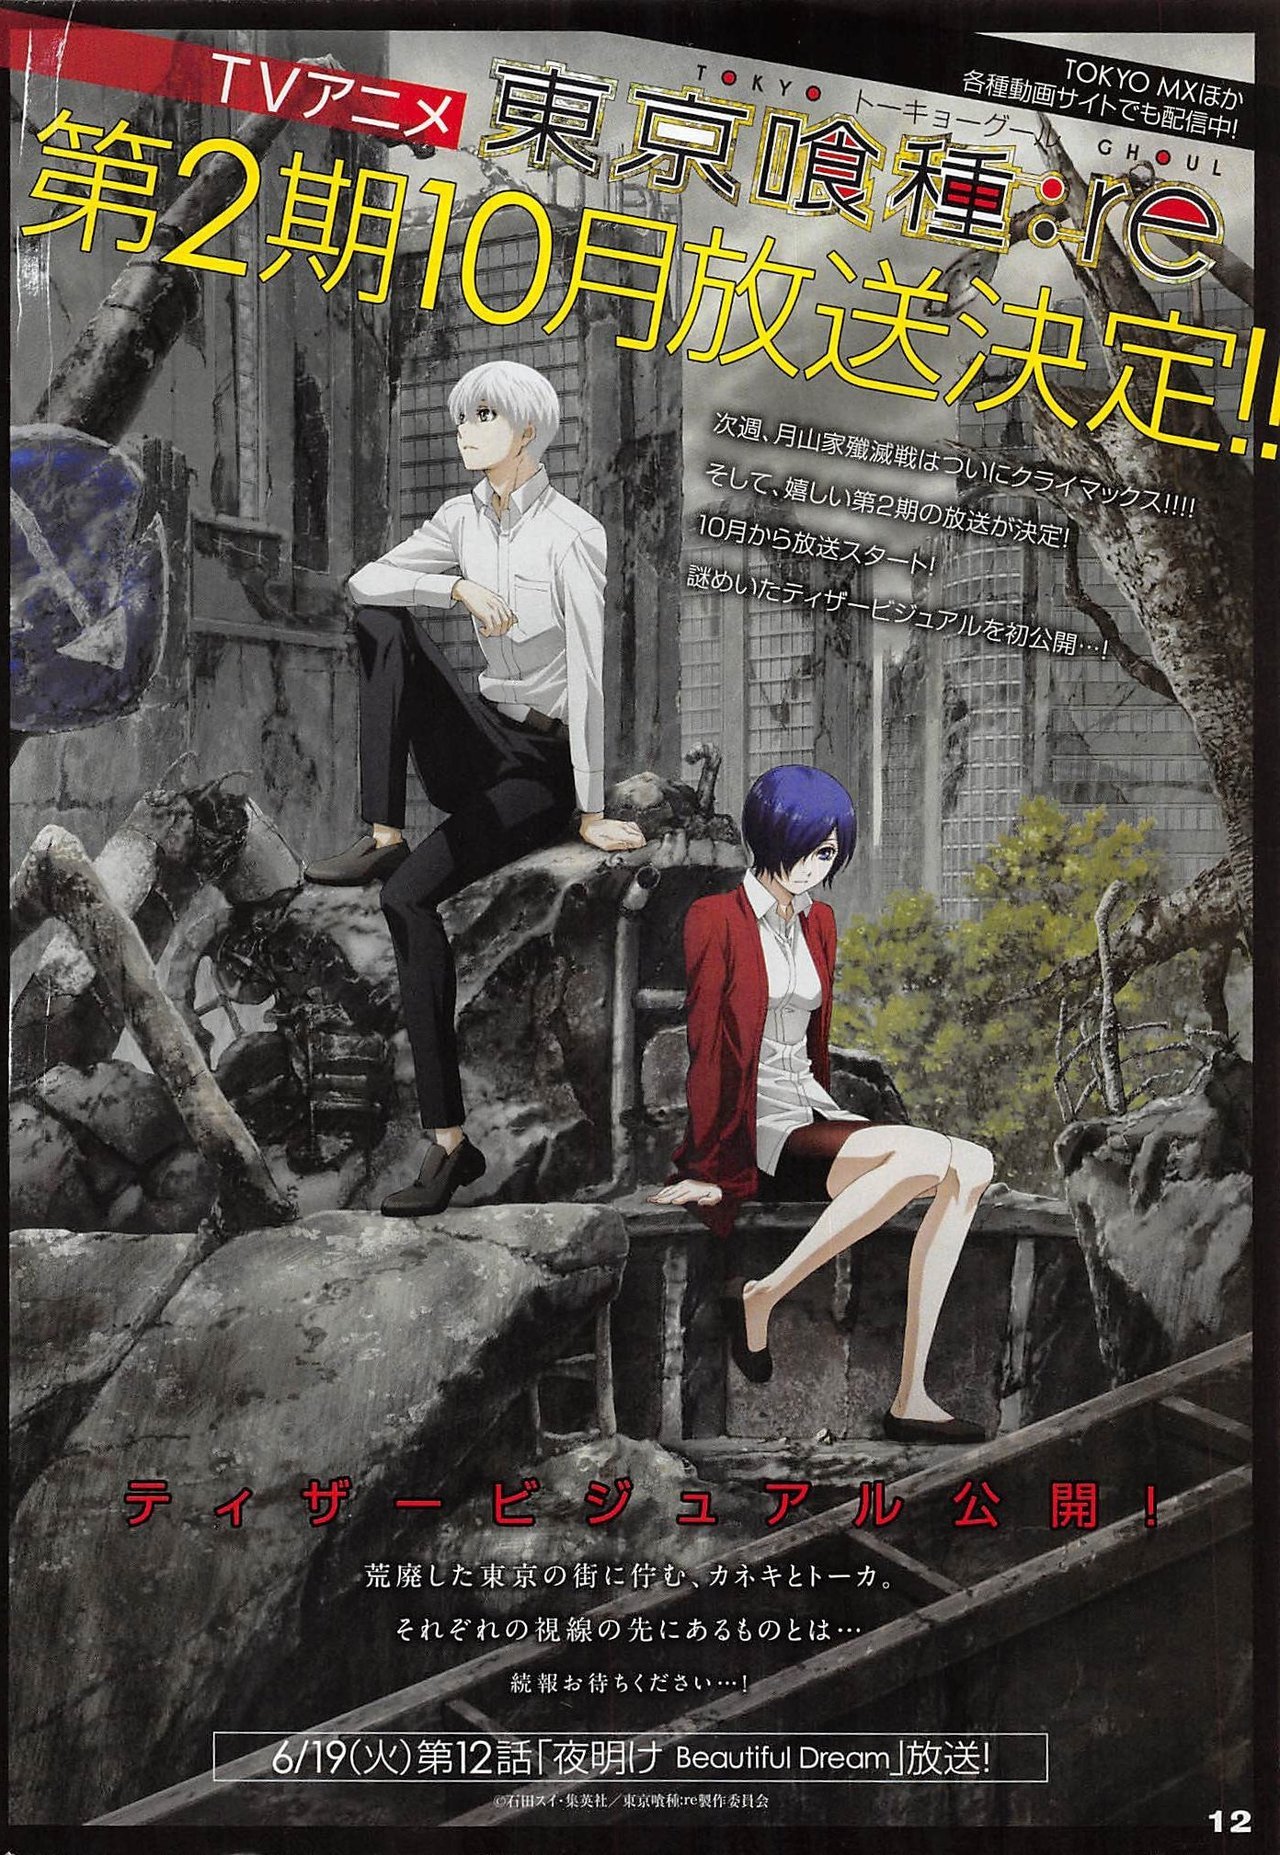 A preview of the âTokyo Ghoul:reâ S2 anime teaser visual. Series begins October.